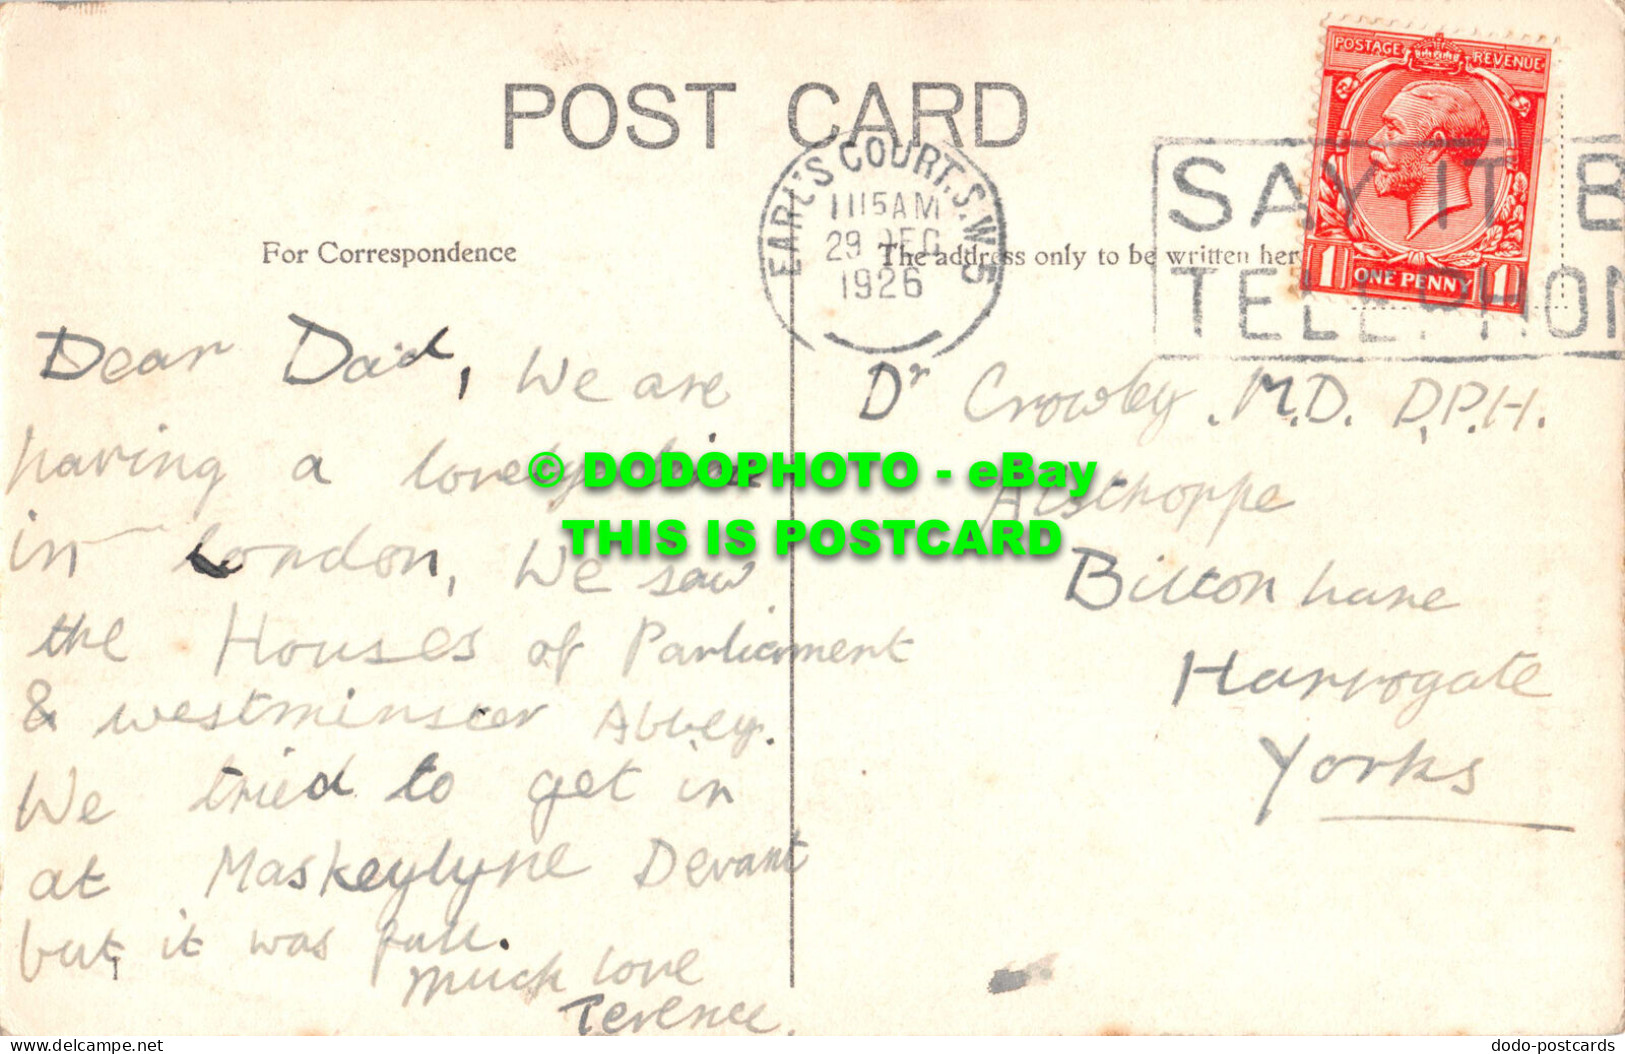 R542397 London. Westminster Abbey And Victoria Tower. 1926 - Other & Unclassified